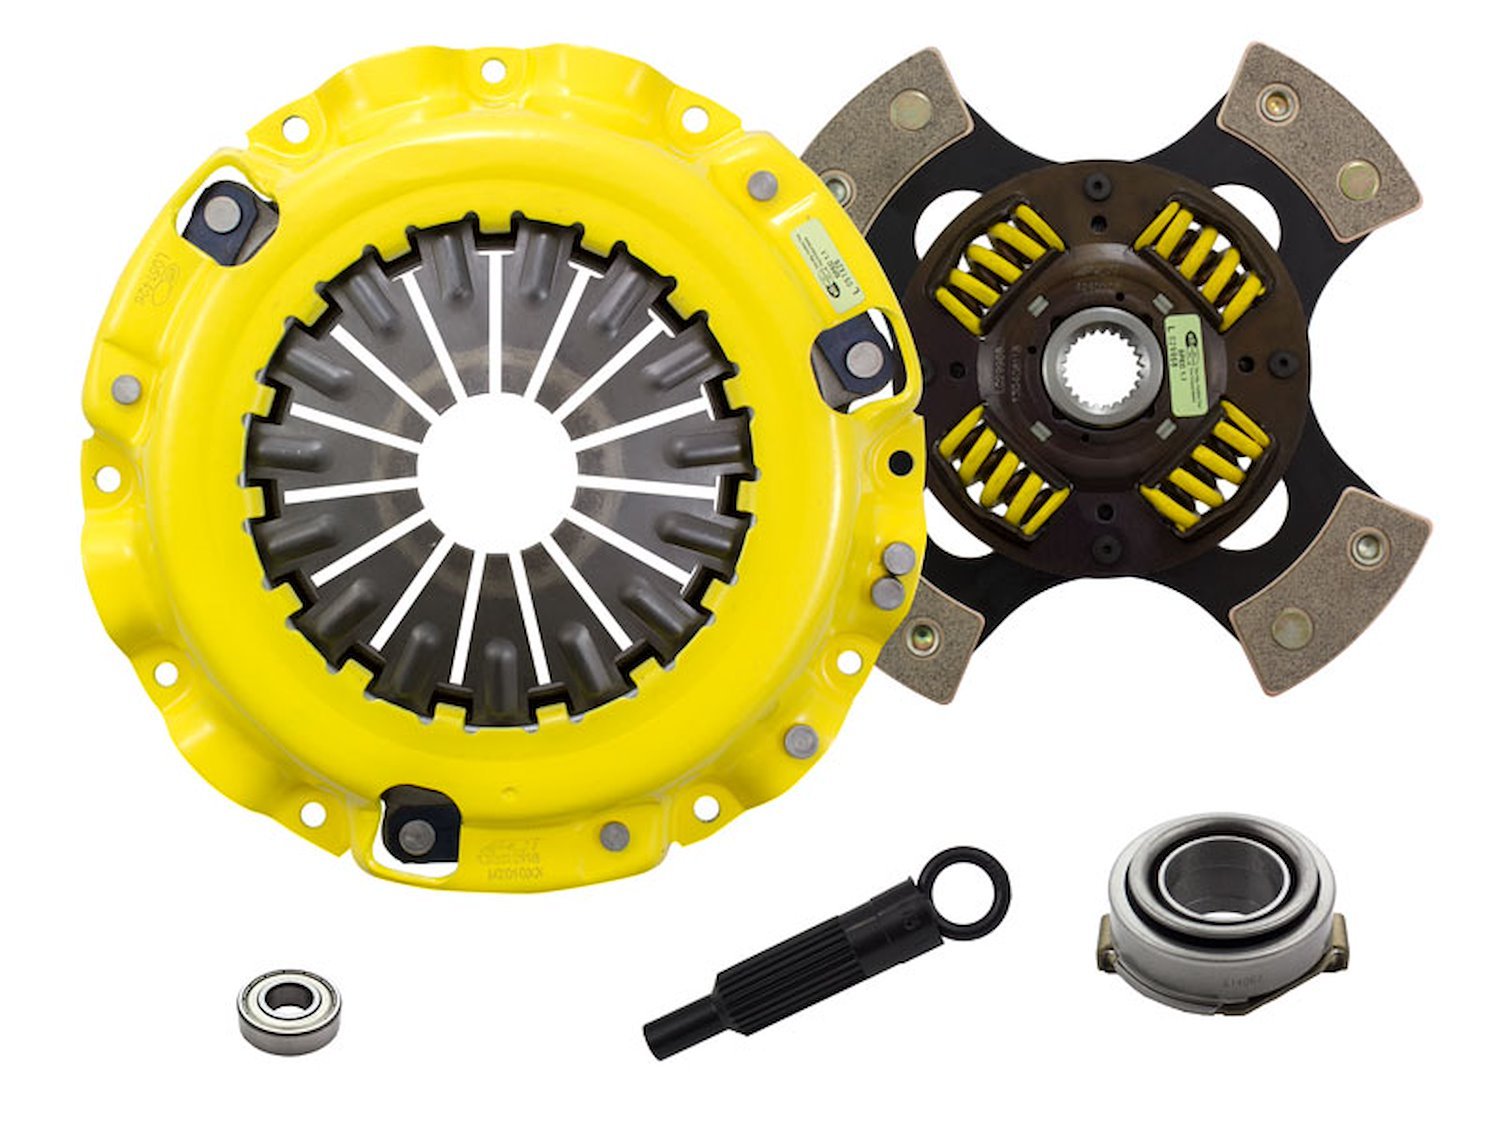 MaXX/Race Sprung 4-Pad Transmission Clutch Kit Fits Select Ford/Lincoln/Mercury/Mazda